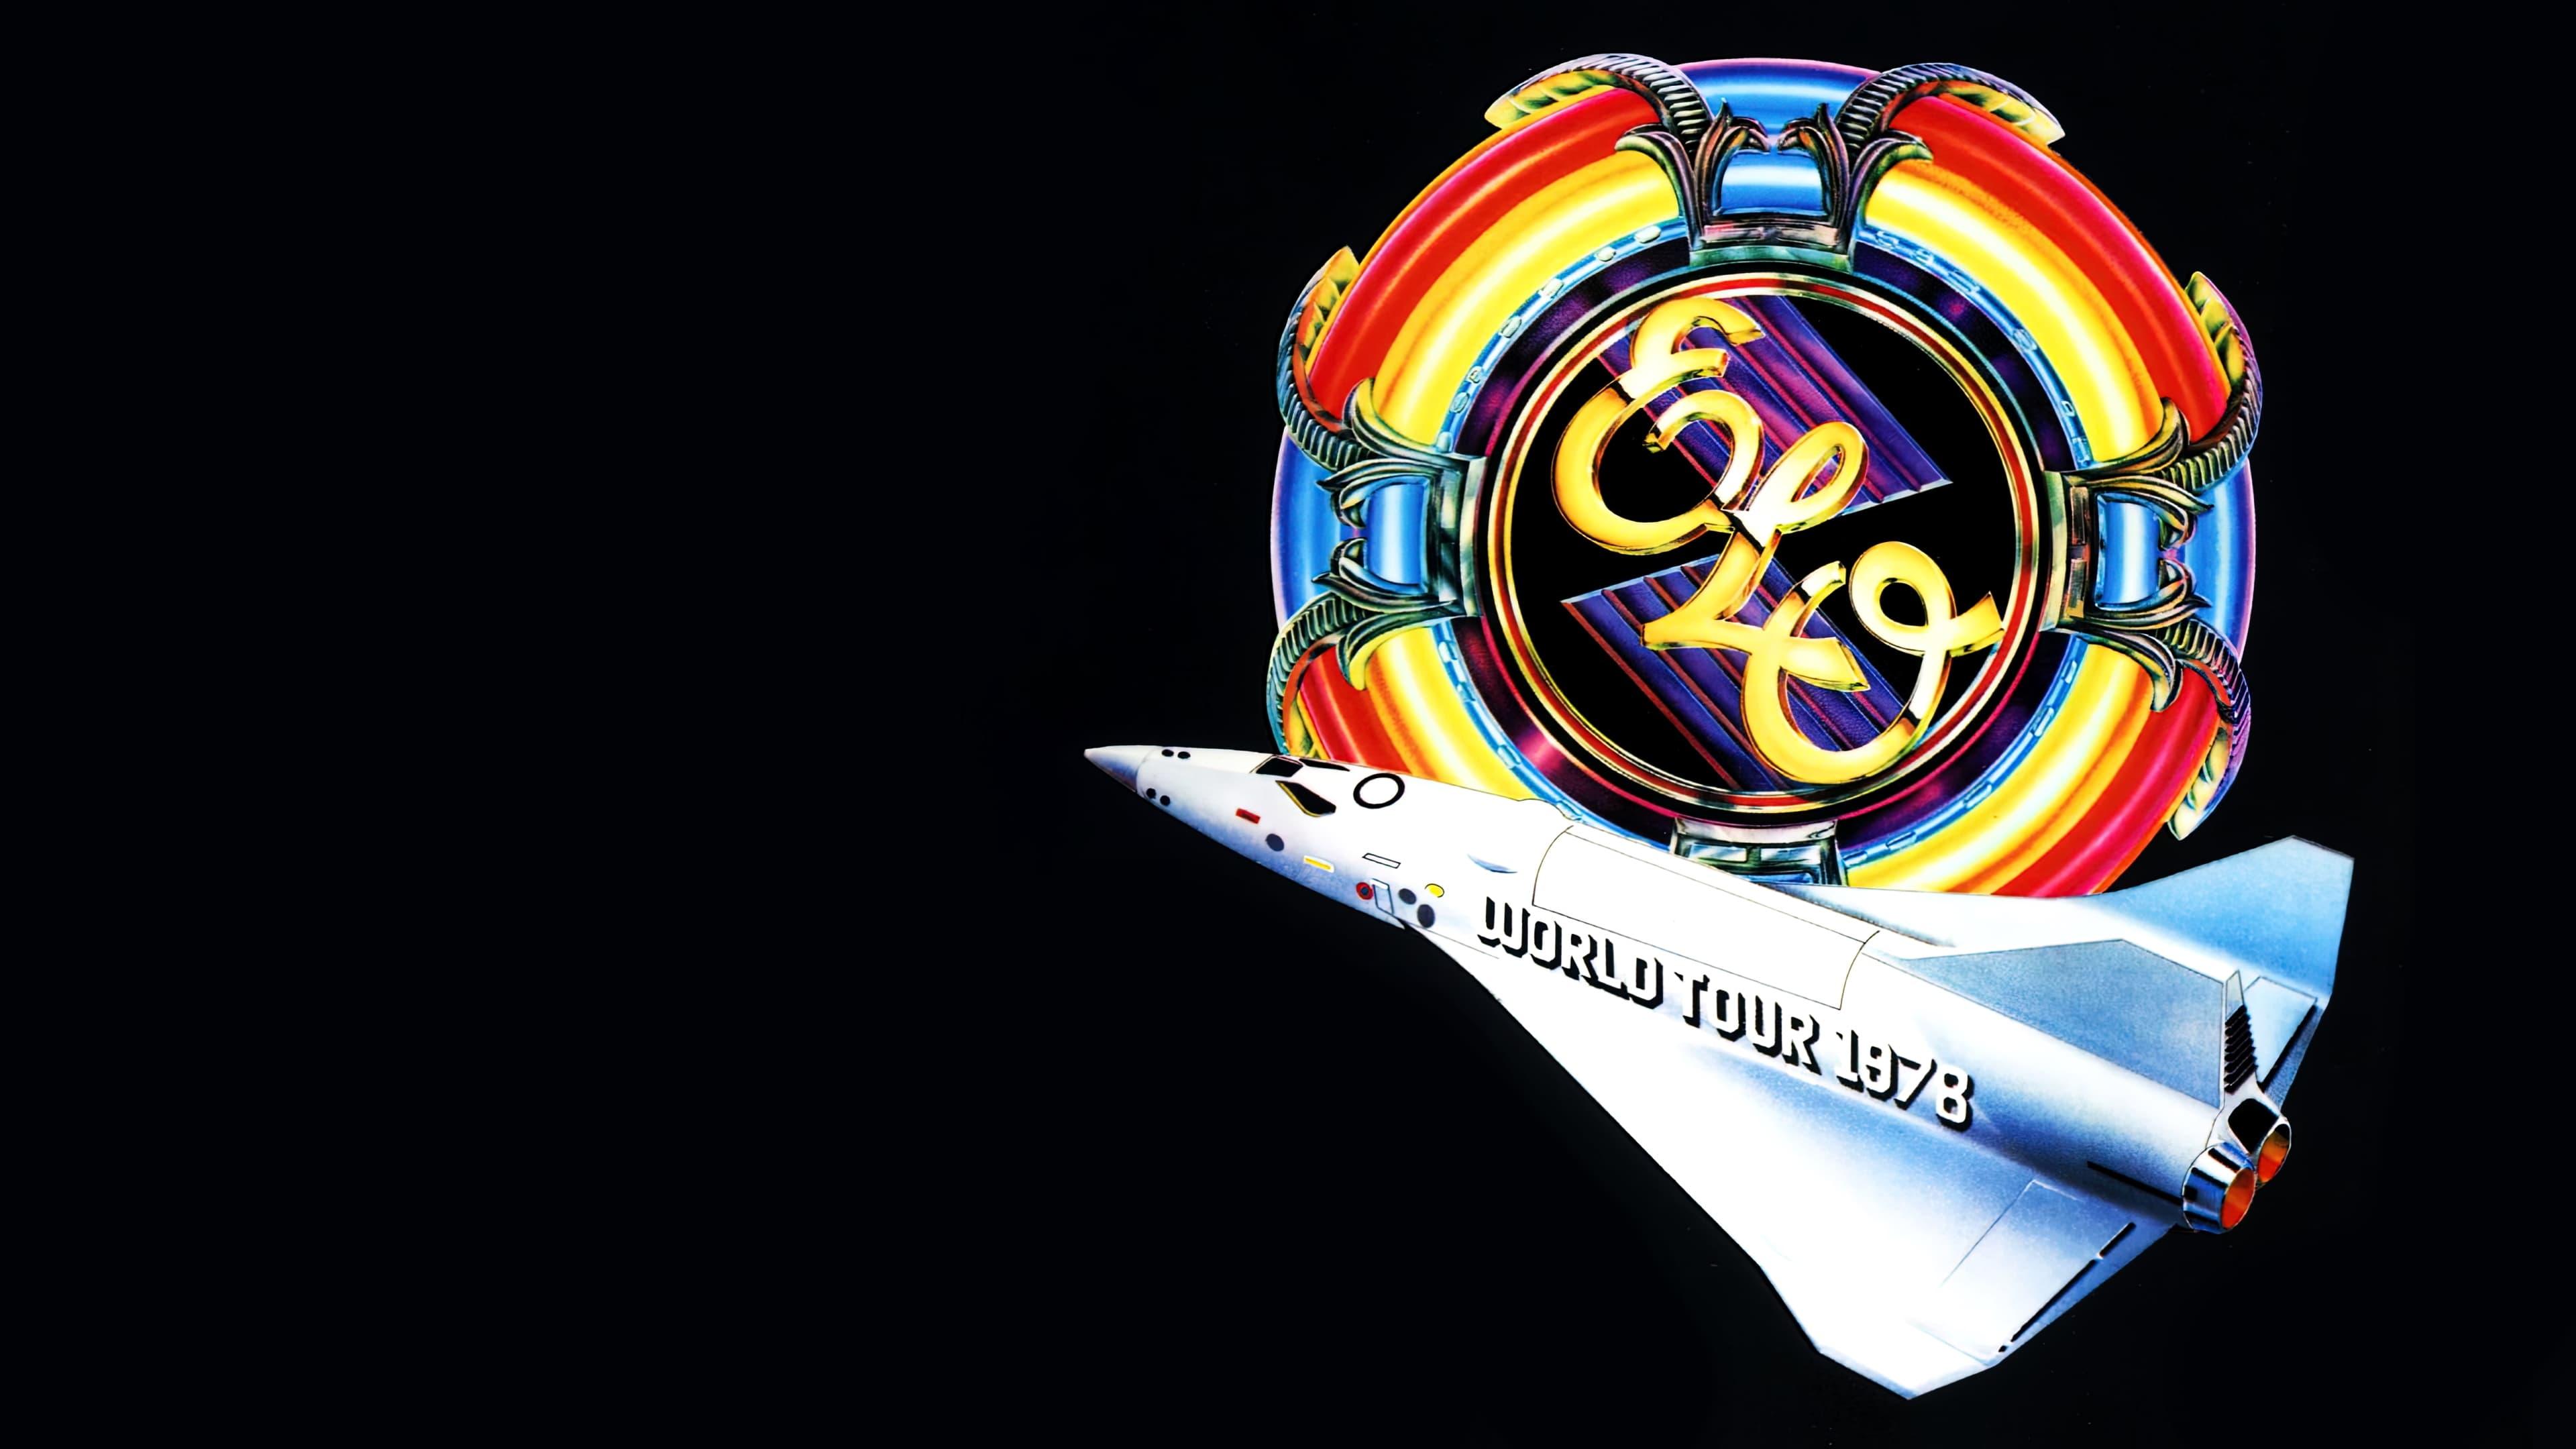 Electric Light Orchestra: Out of the Blue - Live at Wembley backdrop